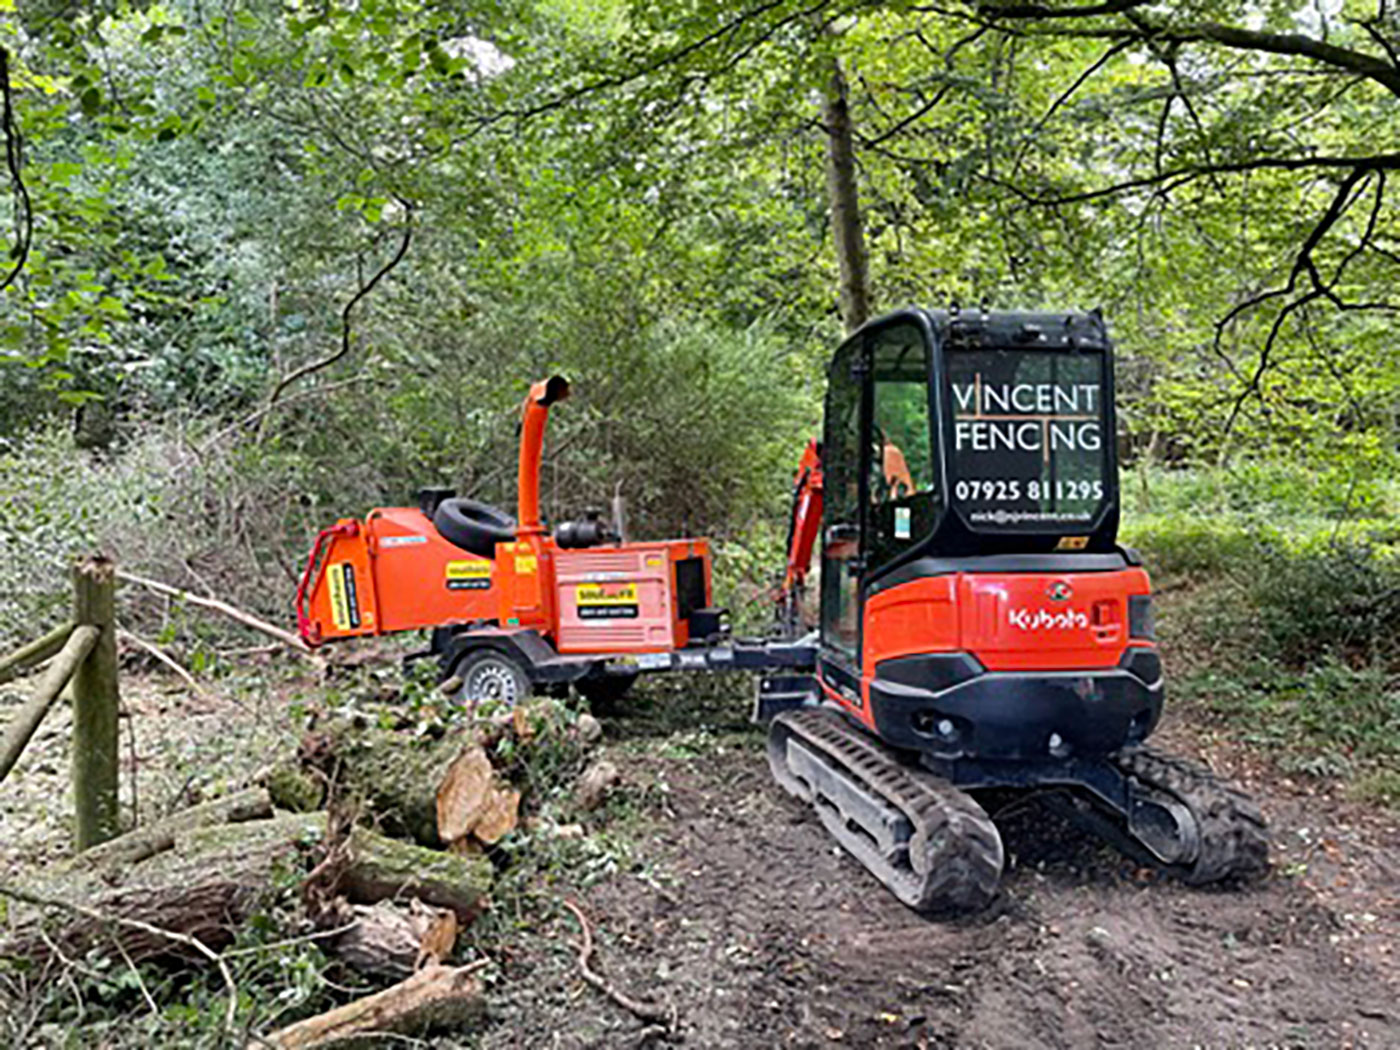 Kubota with tow bar on excavator in use by Vincent Fencing